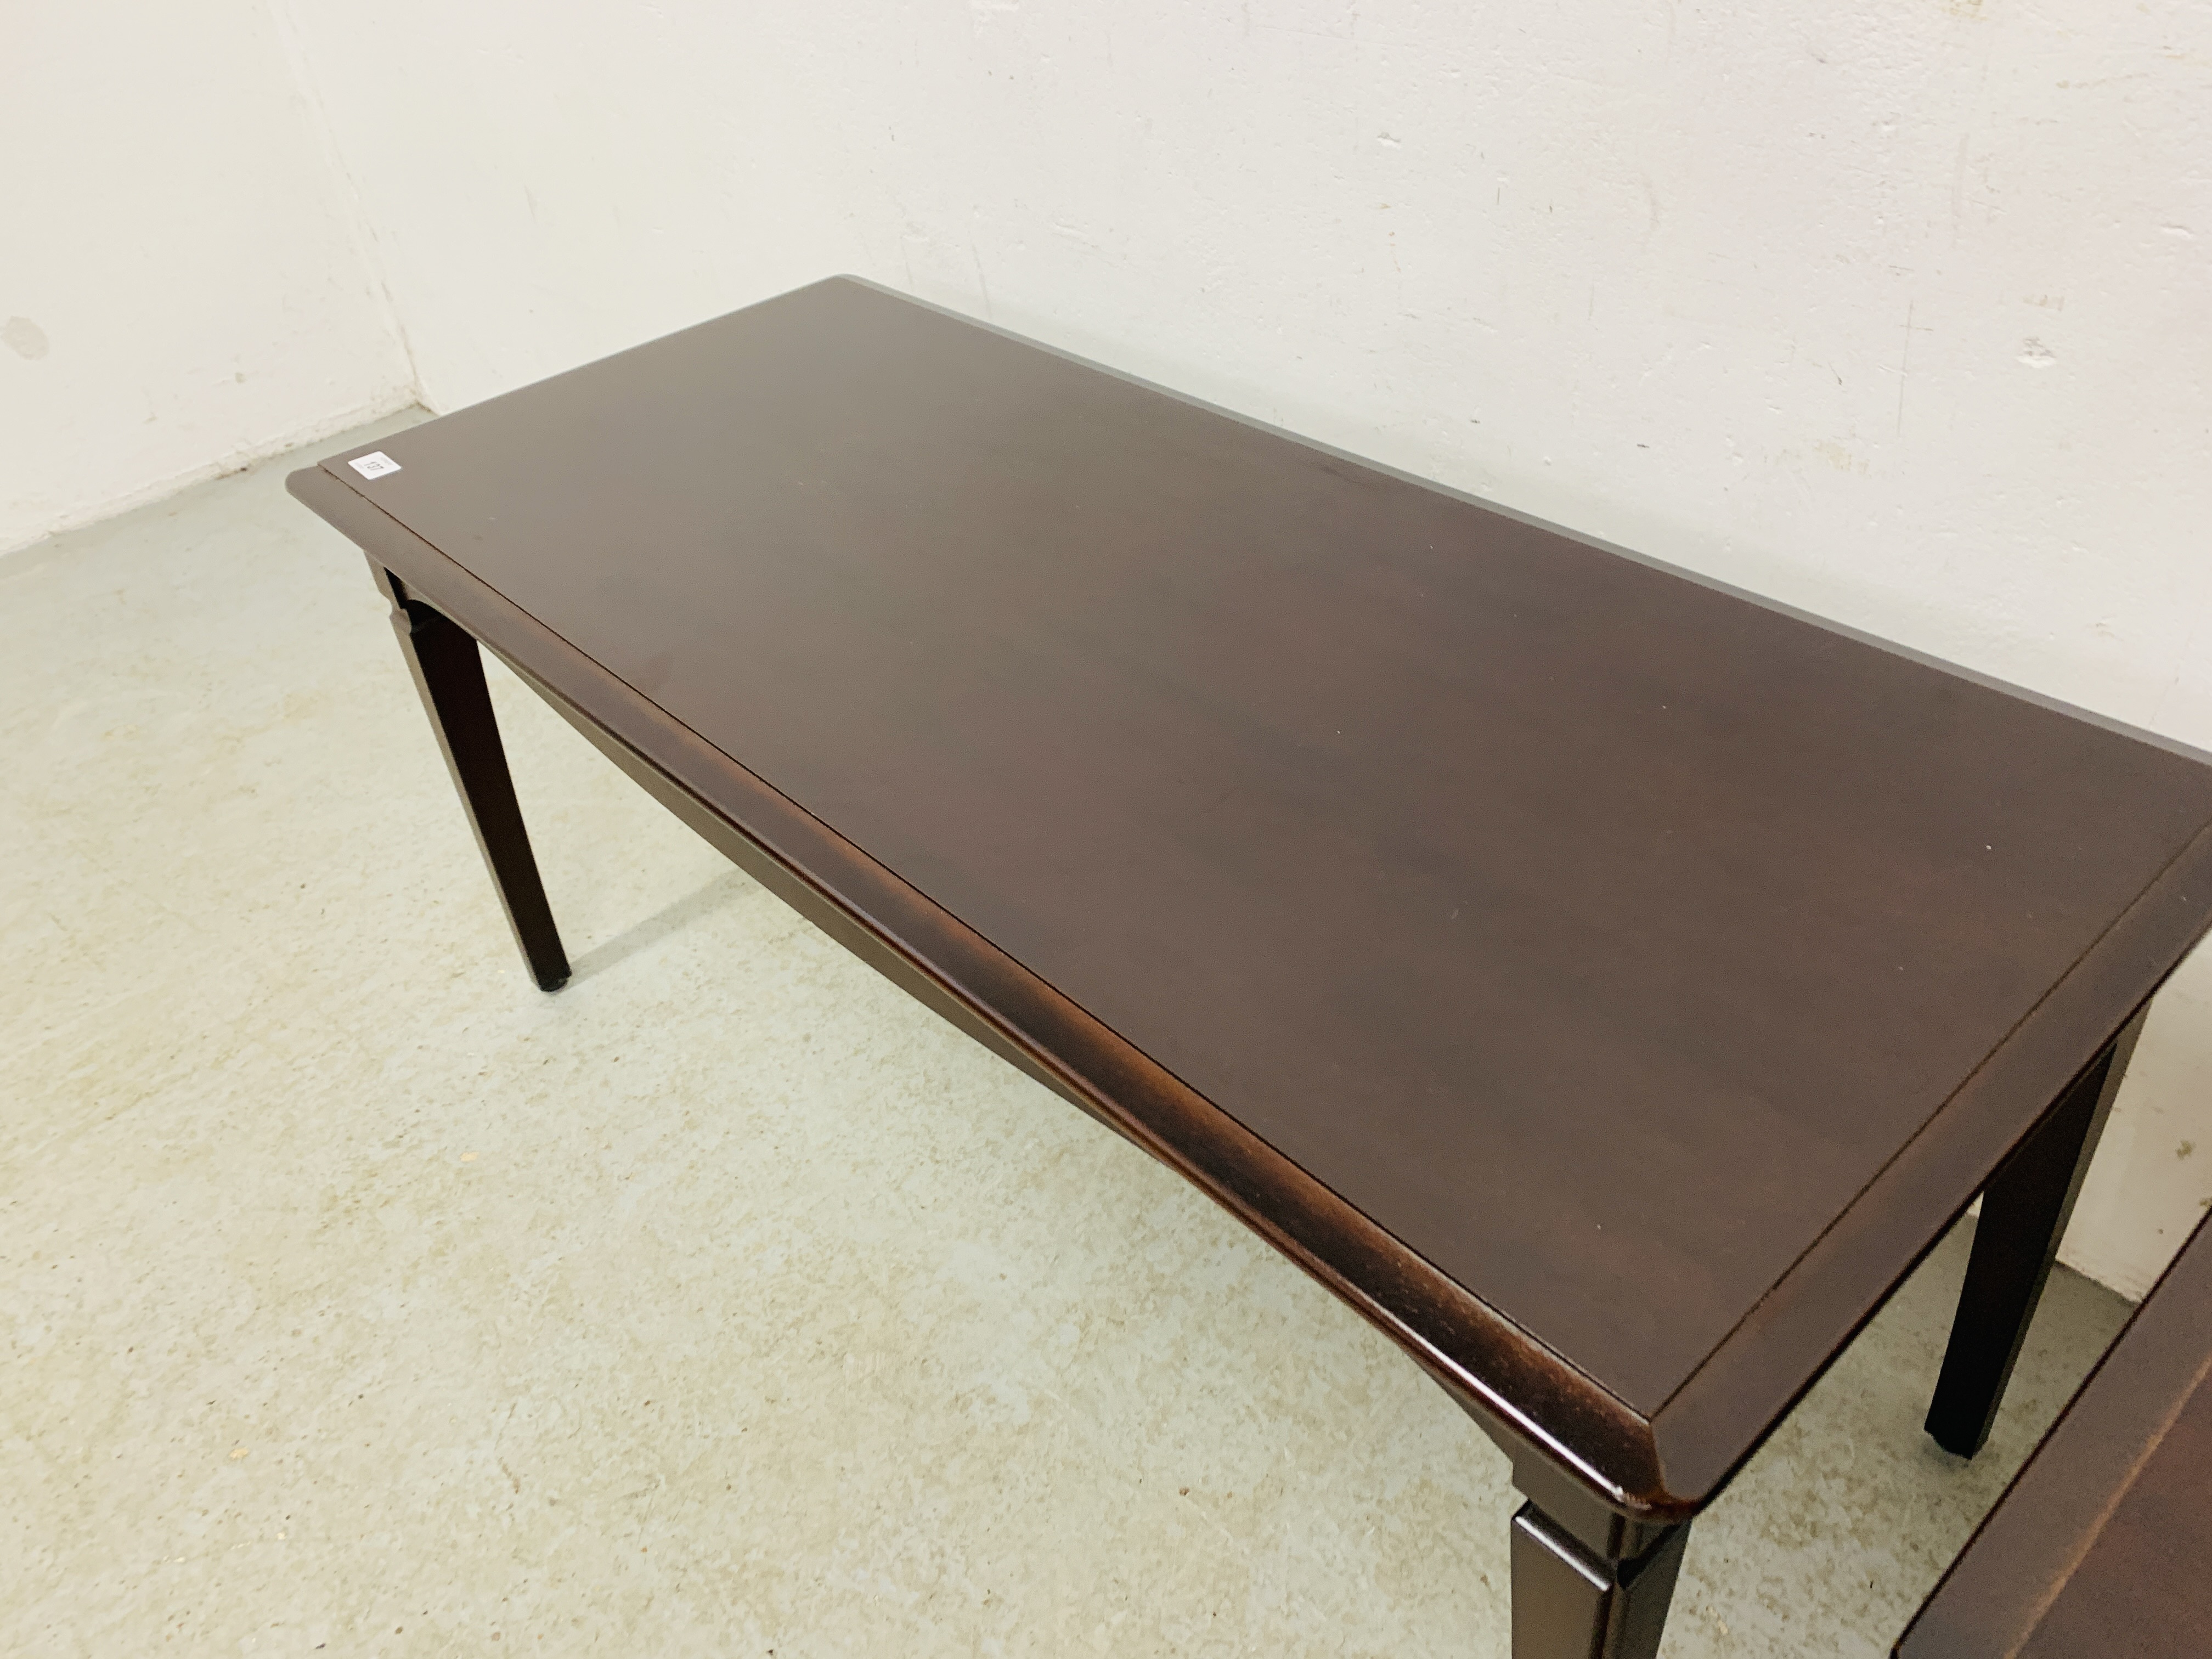 A STAG MINSTRAL RECTANGULAR COFFEE TABLE - W 46CM. L 103 CM. H 46CM. - Image 4 of 8